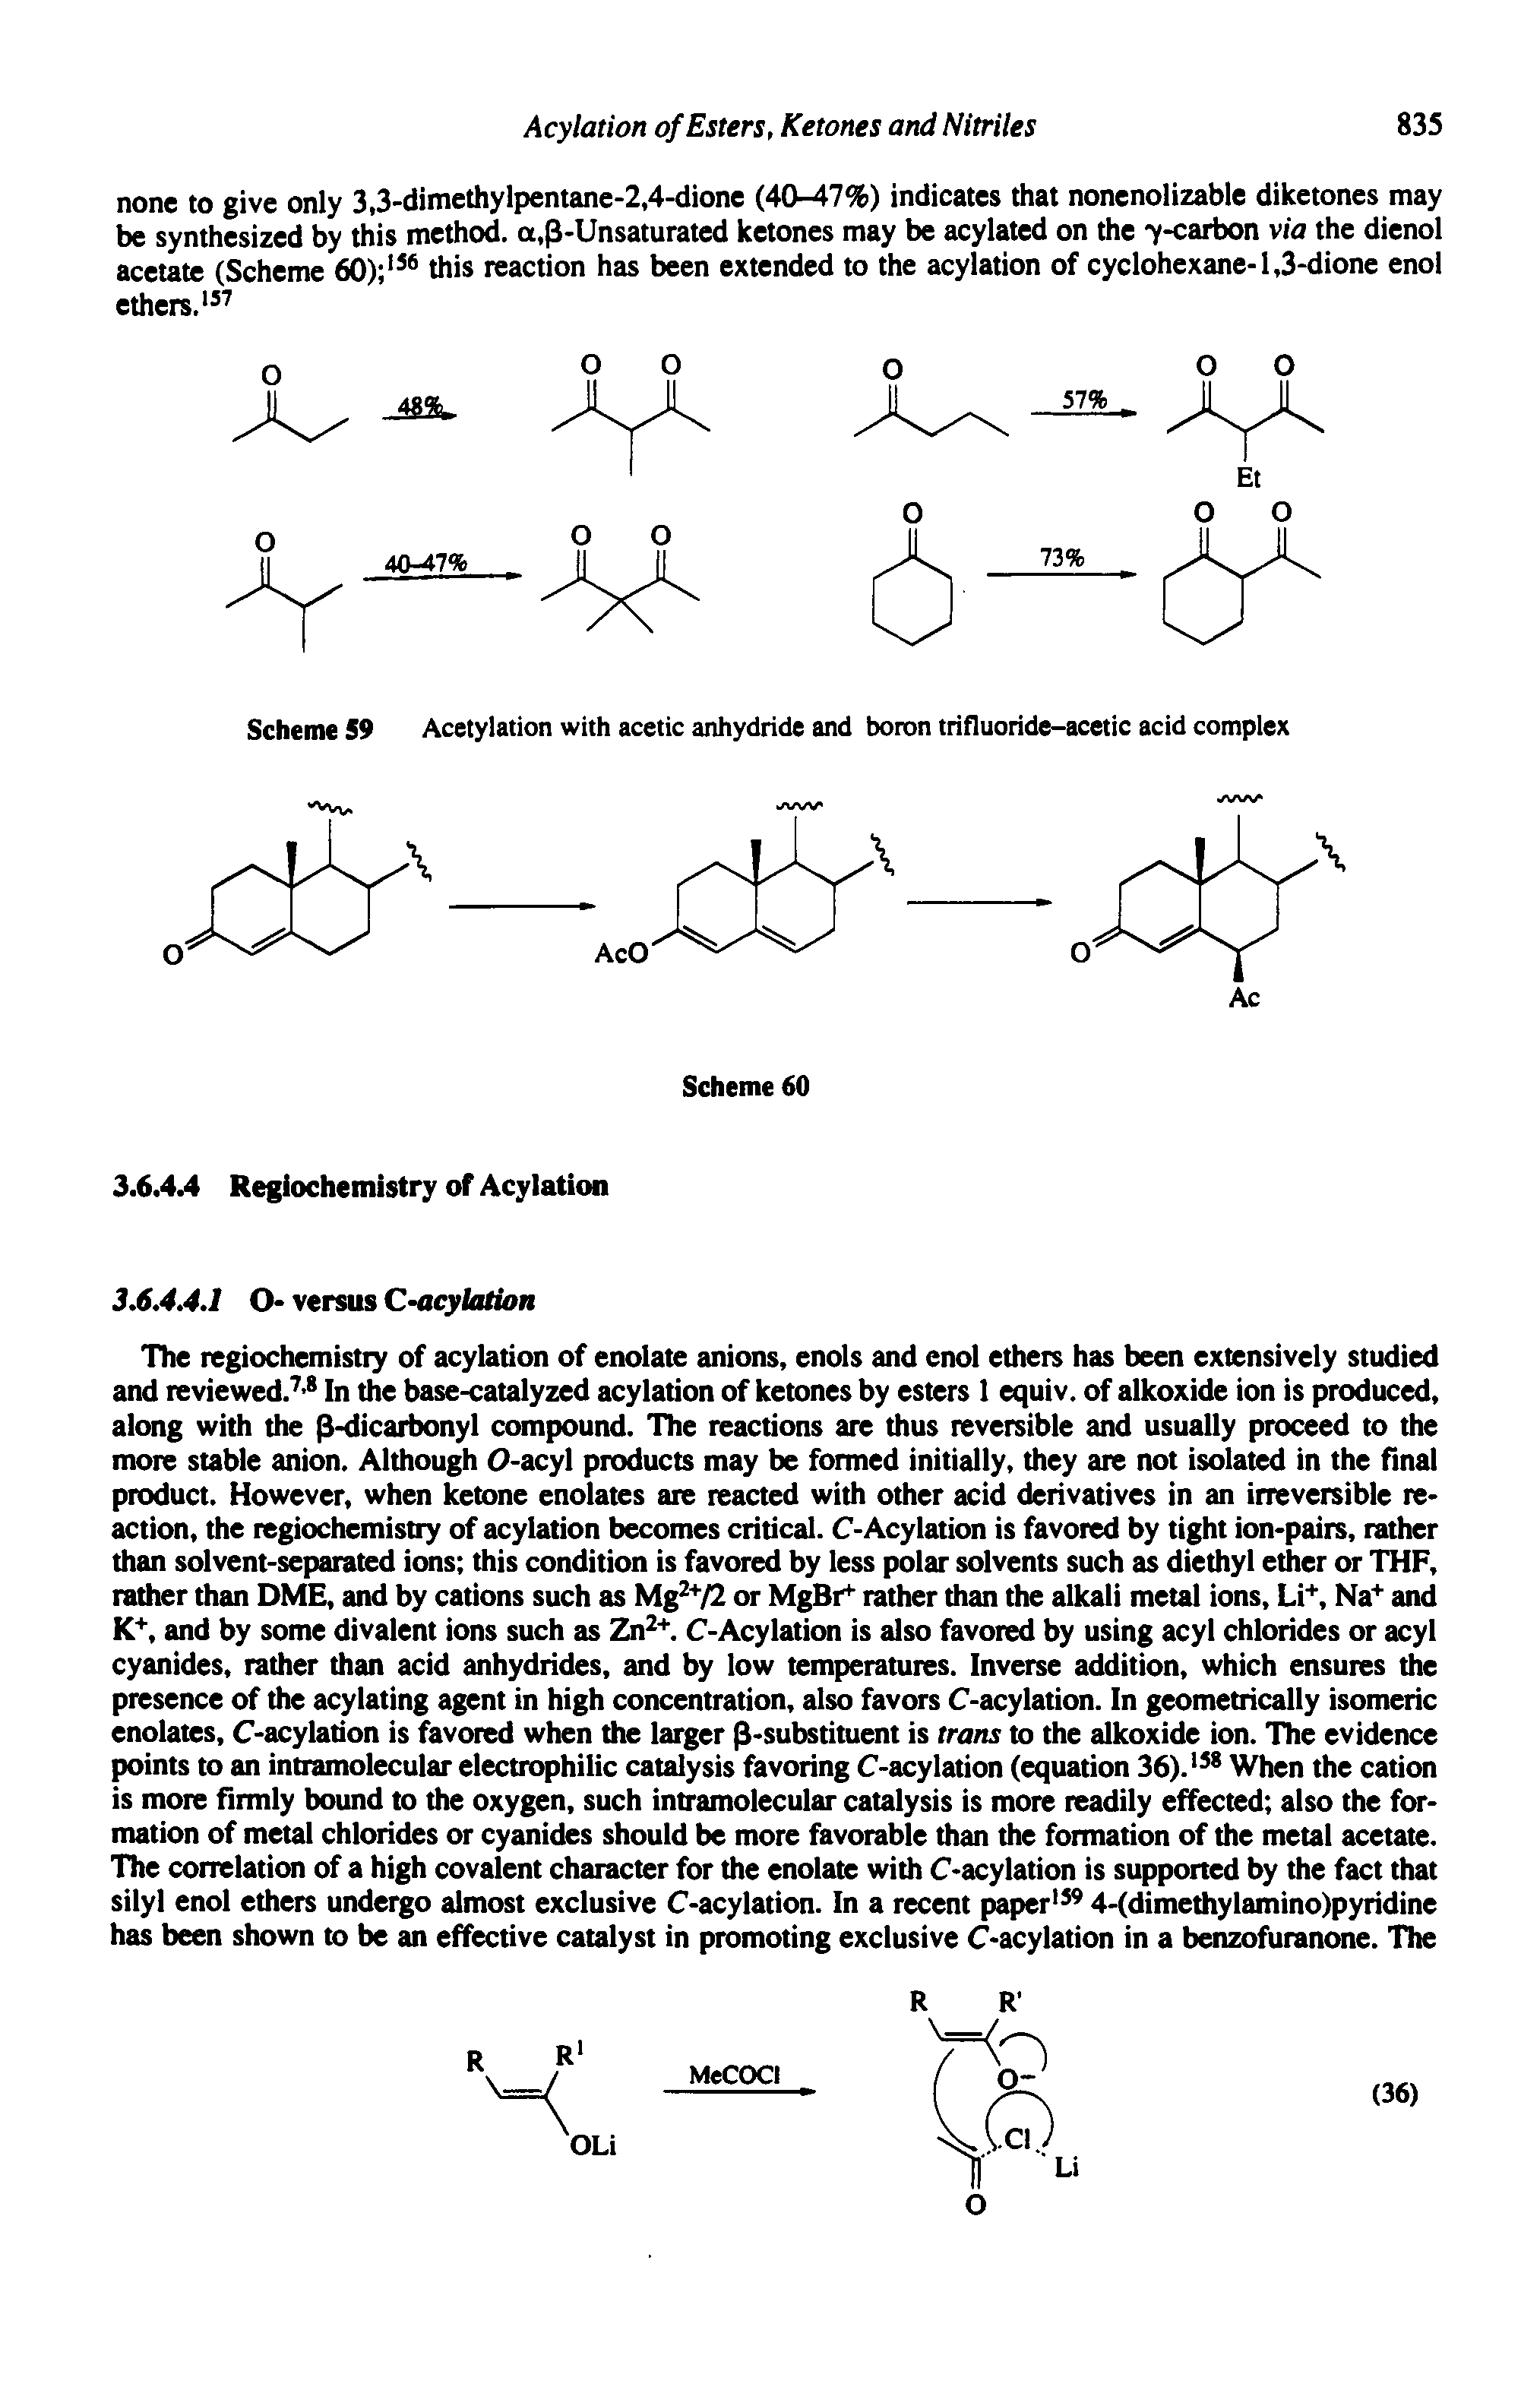 Scheme 59 Acetylation with acetic anhydride and boron trifluoride-acetic acid complex...